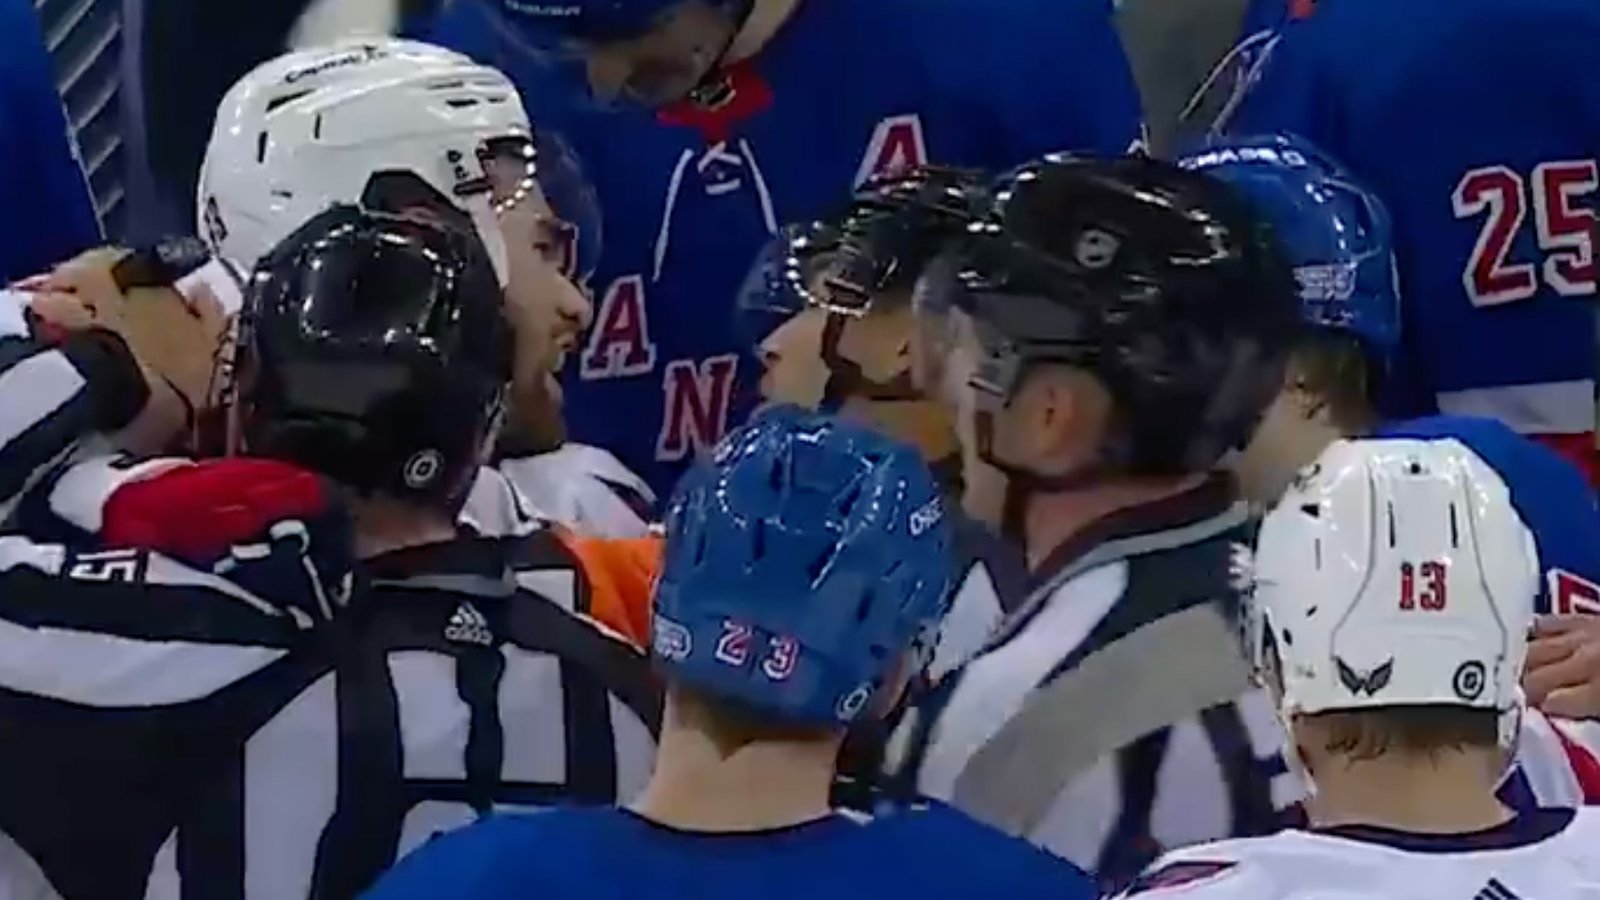 Tom Wilson loses it and needs to be restrained by 3 officials as he attacks Rangers